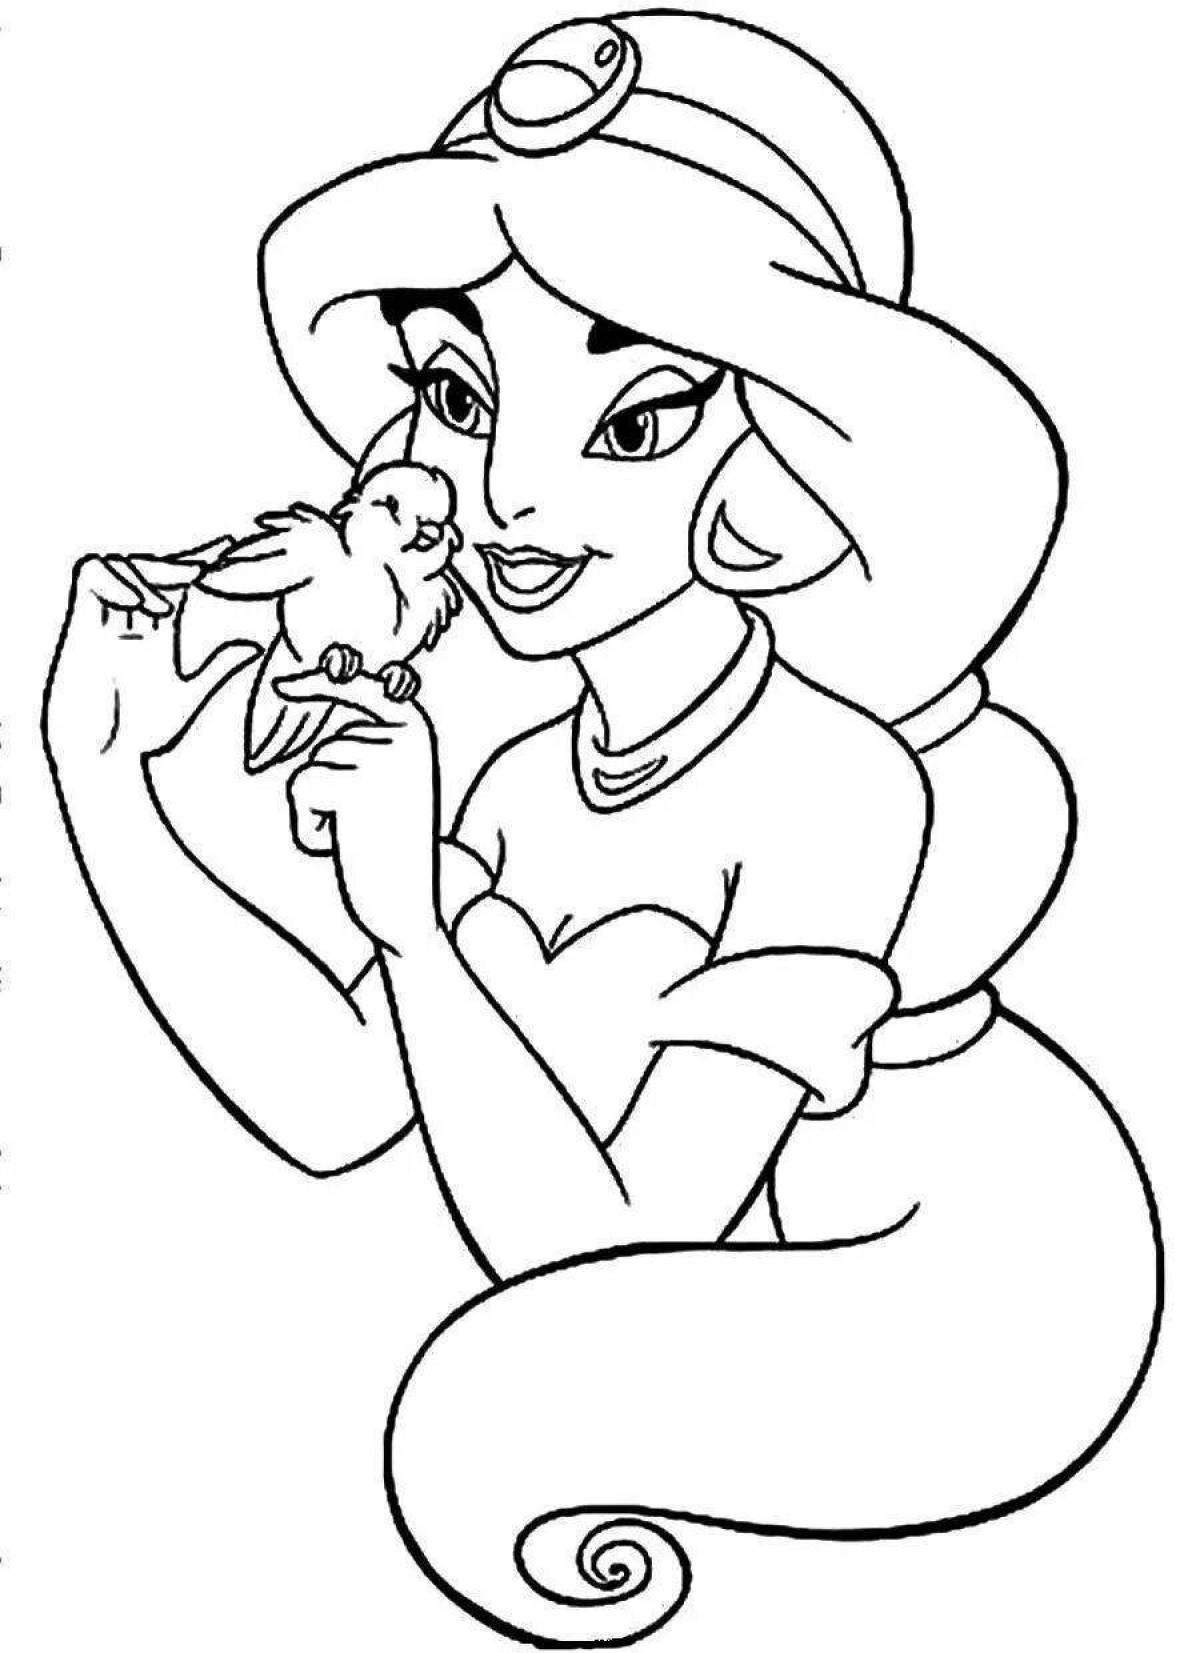 Glowing jasmine coloring page